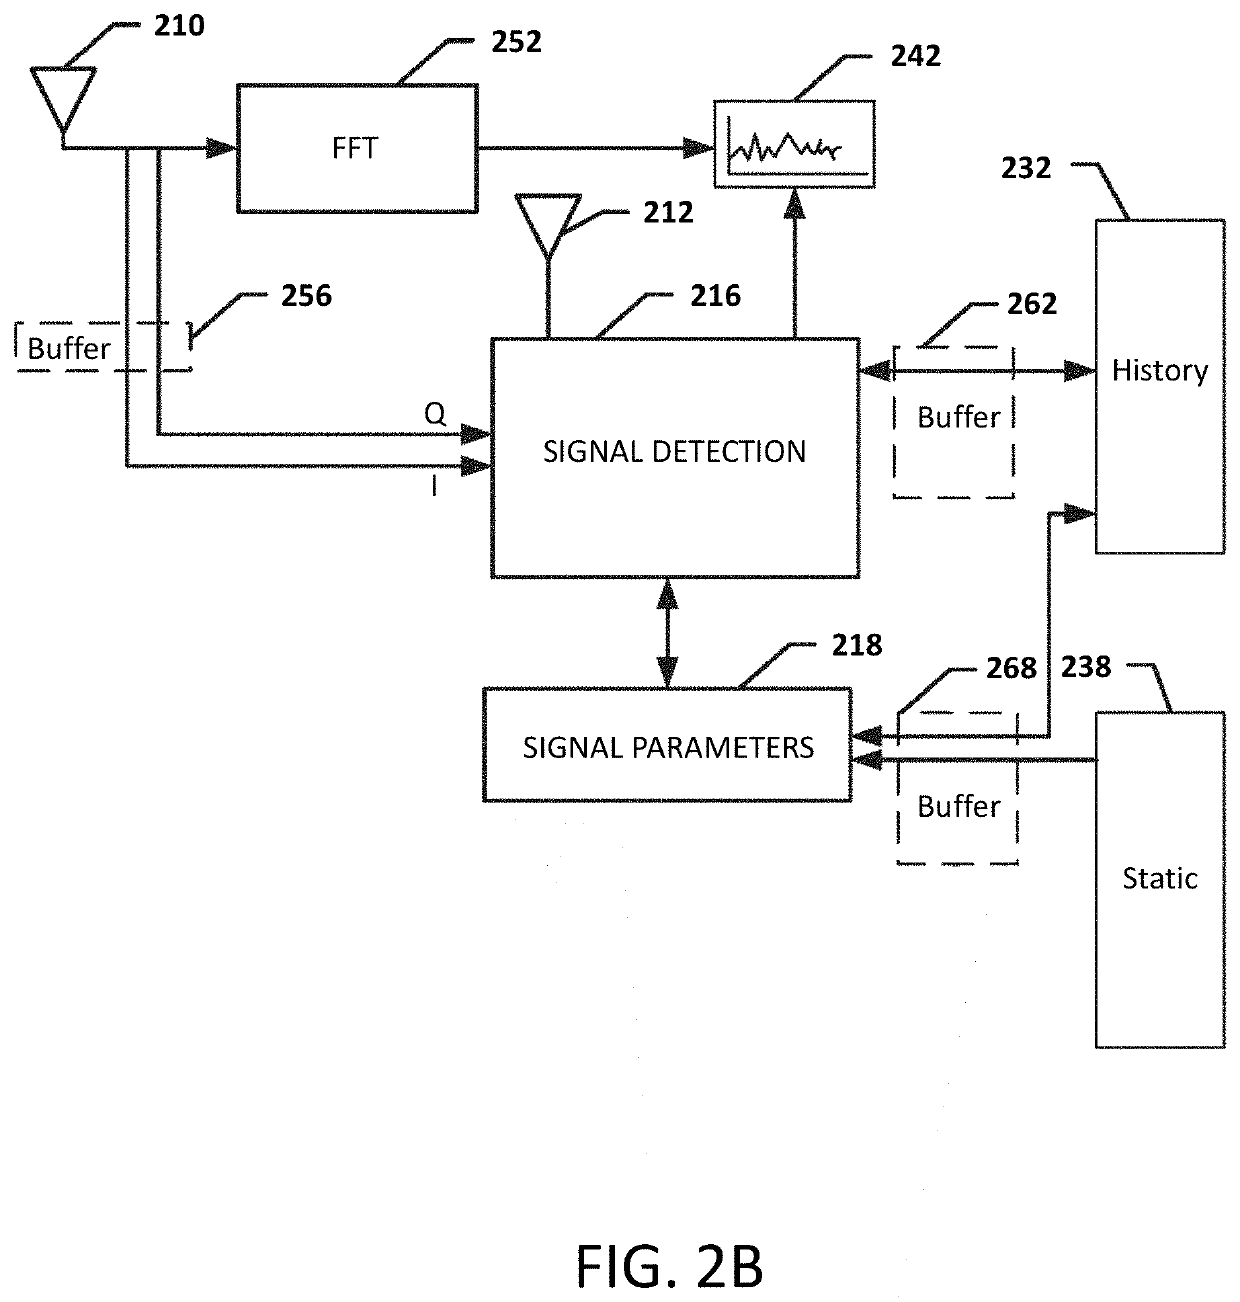 Systems, methods, and devices for automatic signal detection based on power distribution by frequency over time within an electromagnetic spectrum